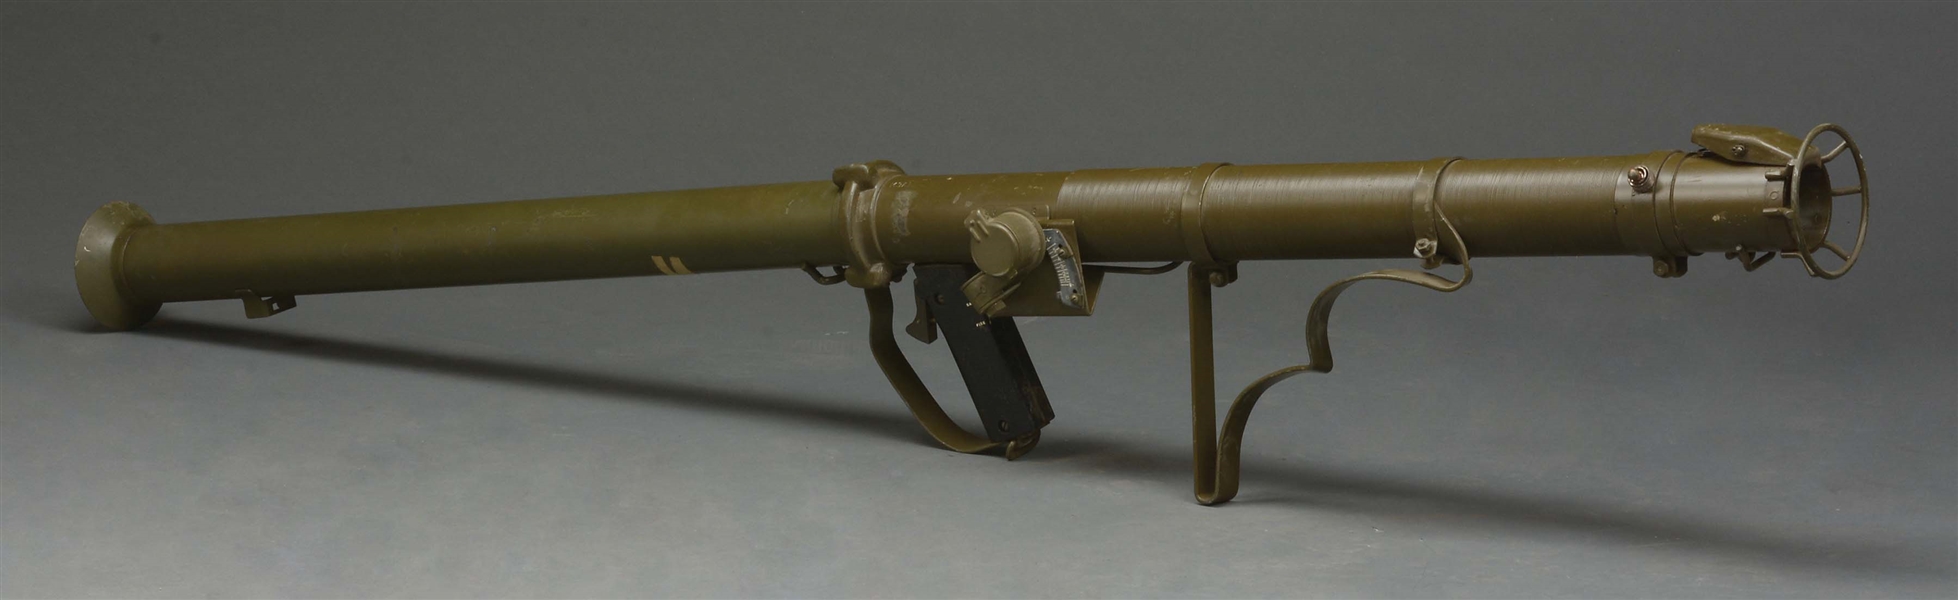 (D) EXTREMELY RARE AND UTTERLY FANTASTIC WORLD WAR II U.S. M9A1 2.36 INCH ROCKET LAUNCHER BAZOOKA (DESTRUCTIVE DEVICE).